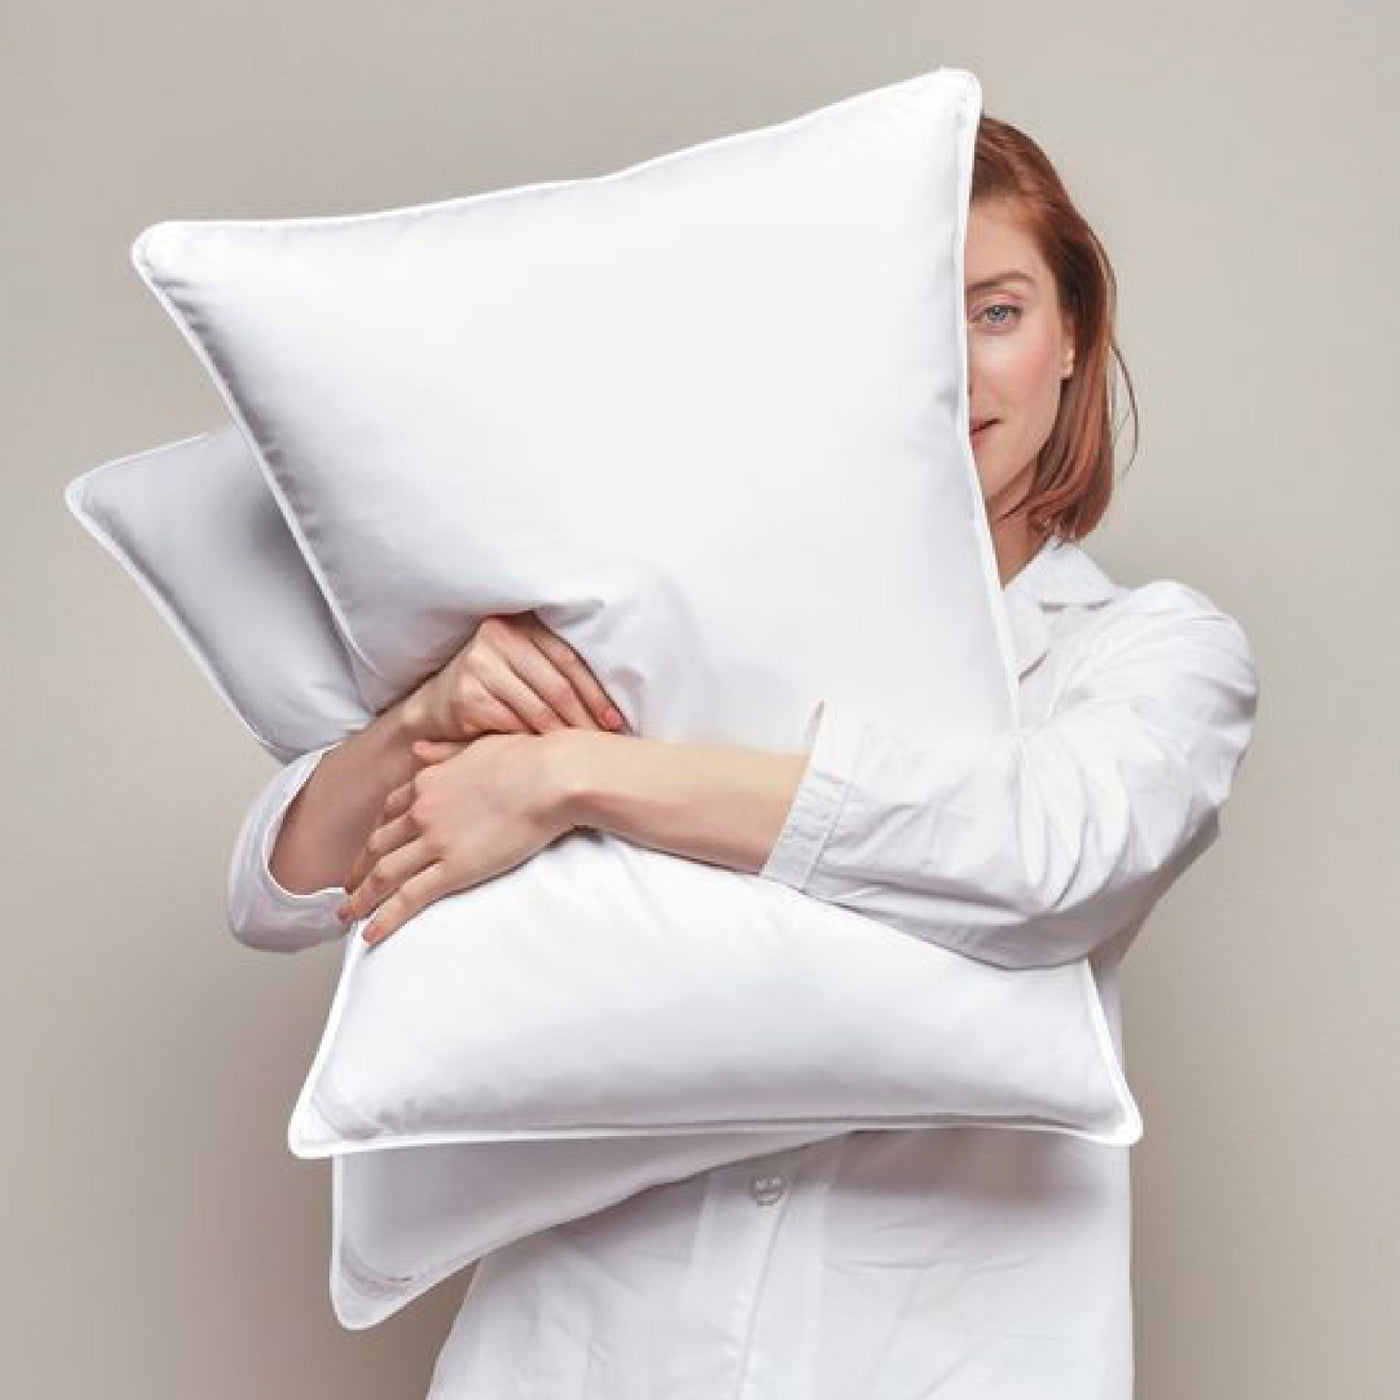 Cotton Shell Down Alternative Pillow Insert without Gusset